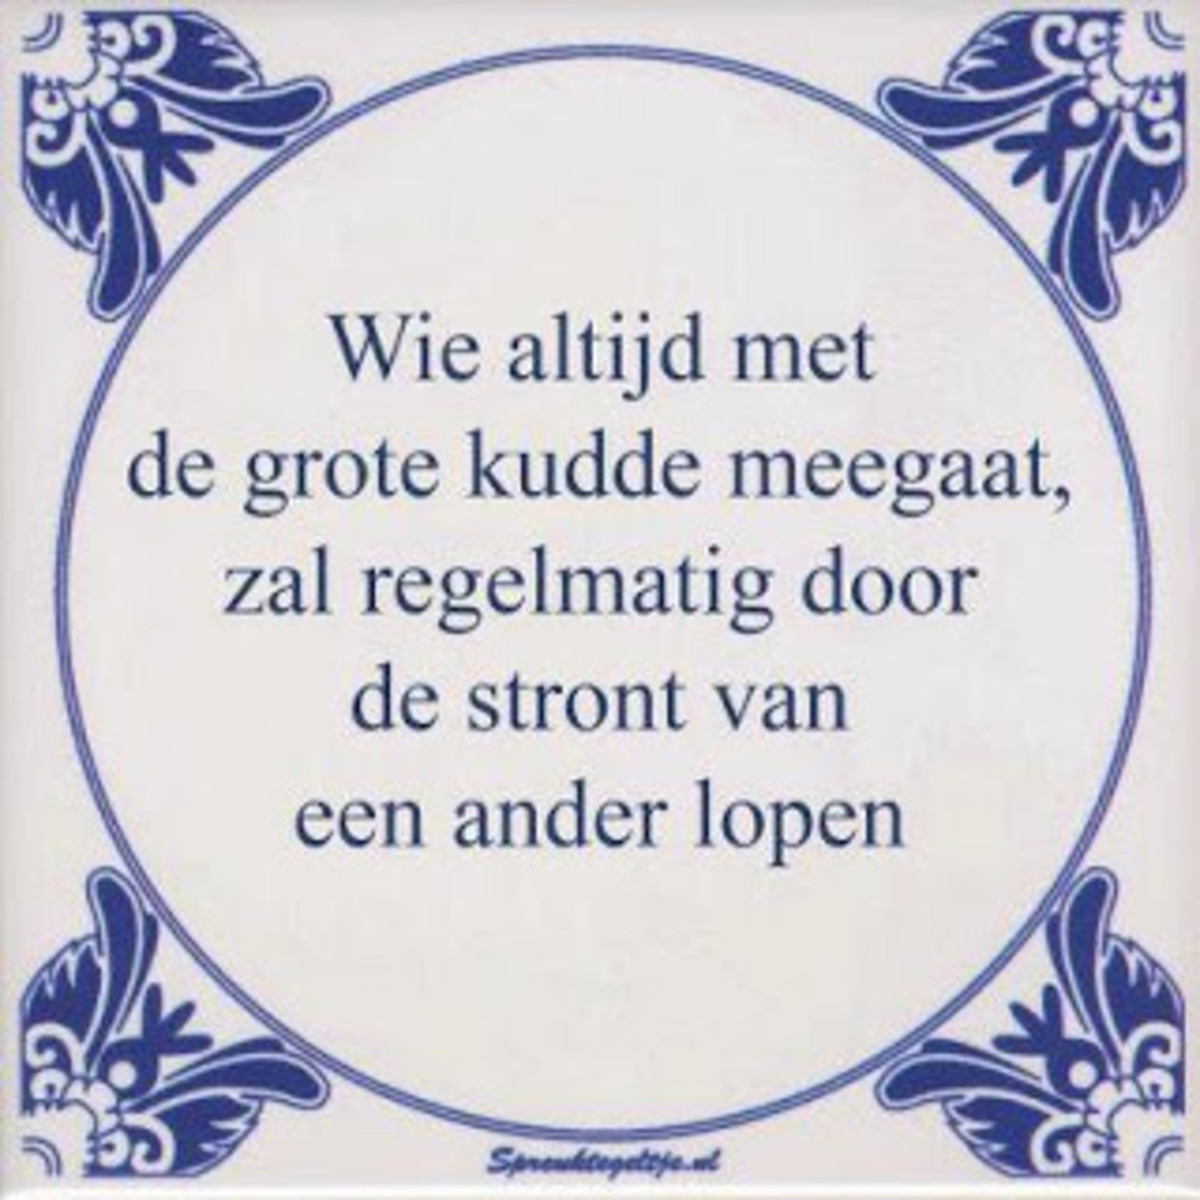 Dutch are inventive in coming up with unofficial proverbs and put them on a tile. This one means: "who always walks with the big herd, will regularly run through the shit of another".